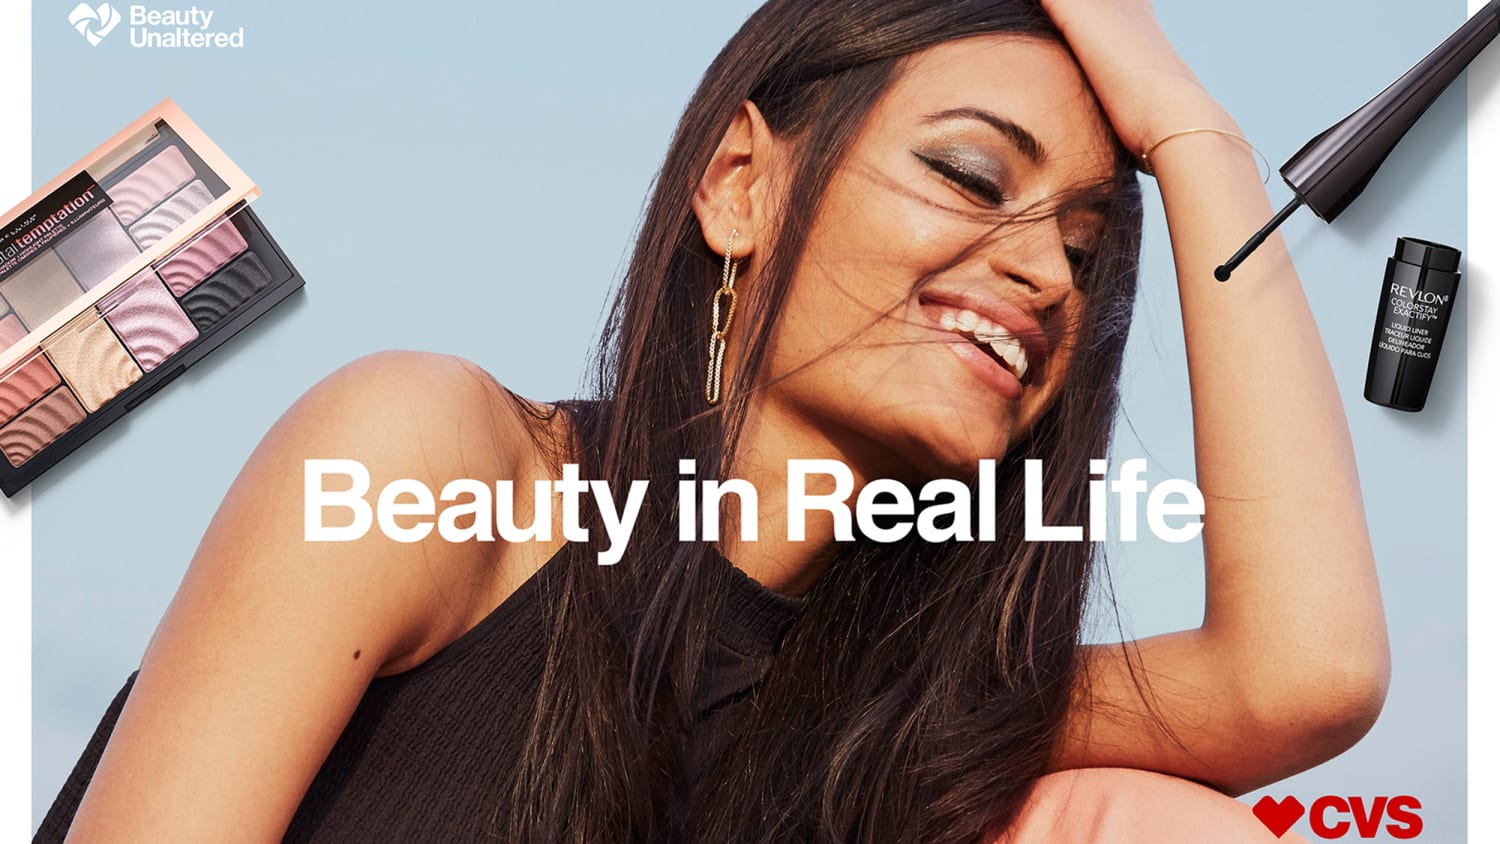 cvs launches  u2018beauty in real life u2019 campaign  unaltered